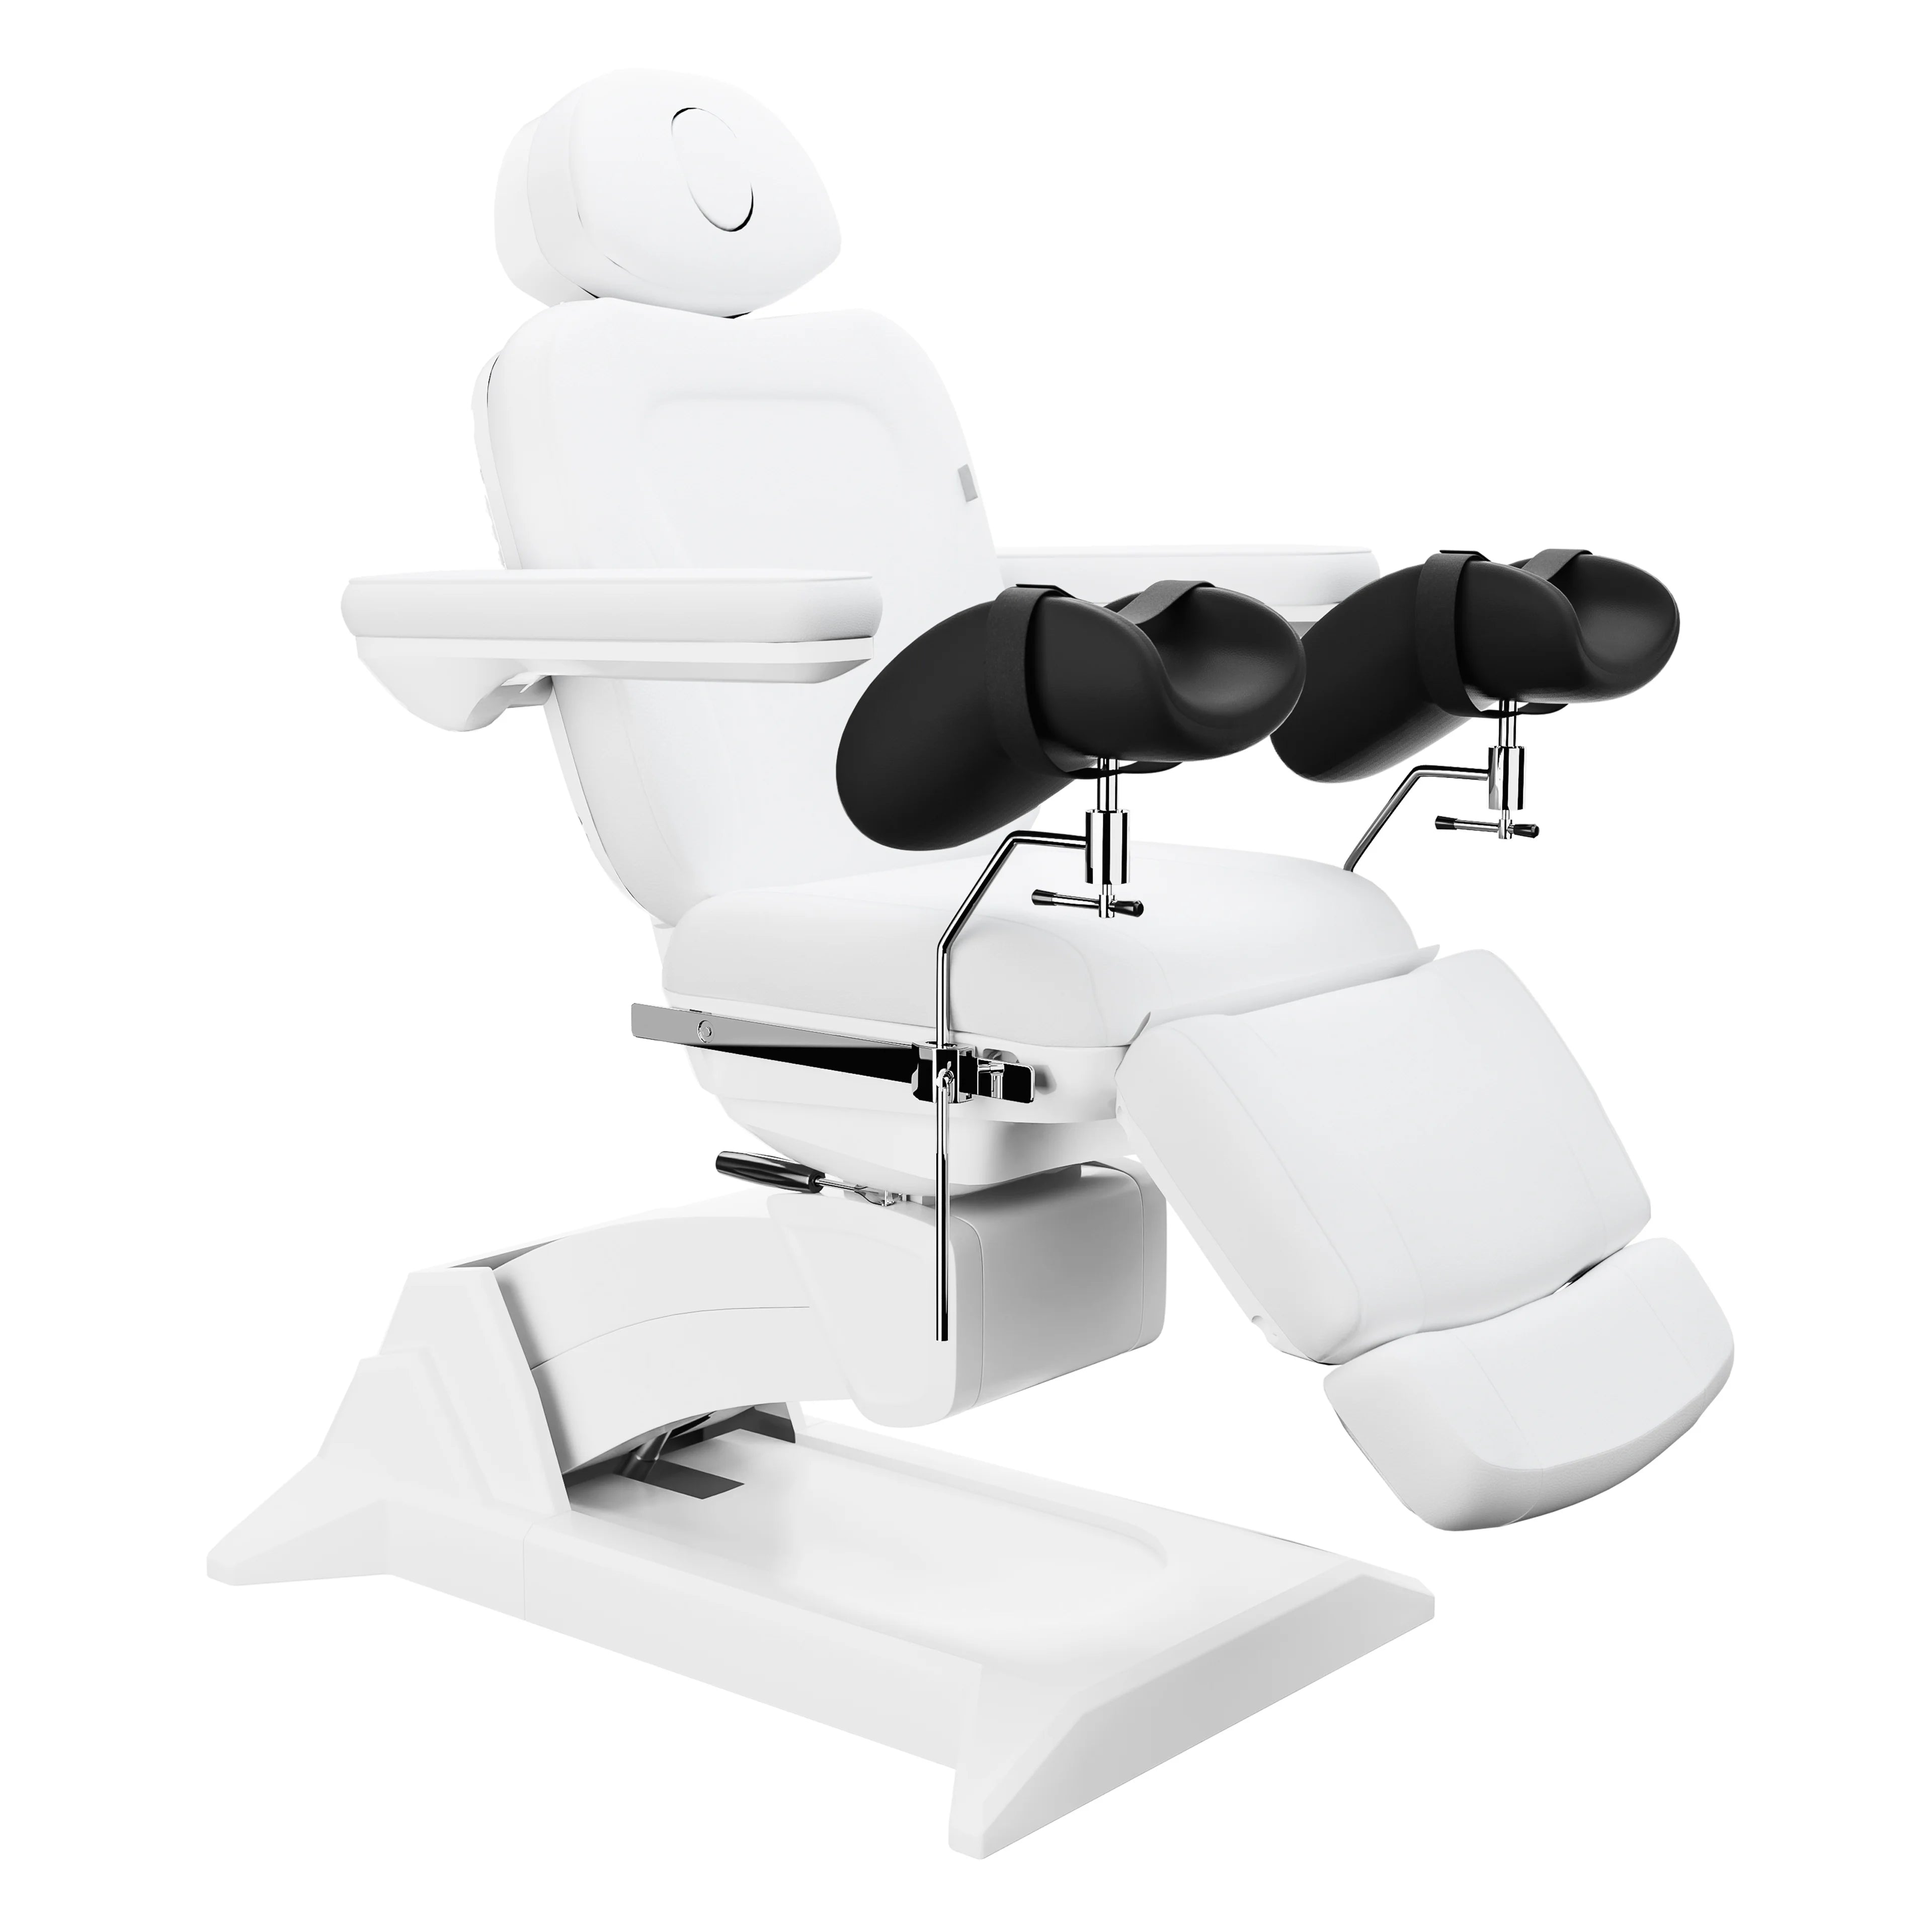 SpaMarc . Ultera (White) . OBGYN & Gynecology . Rotating . 4 Motor Spa Treatment Chair/Bed